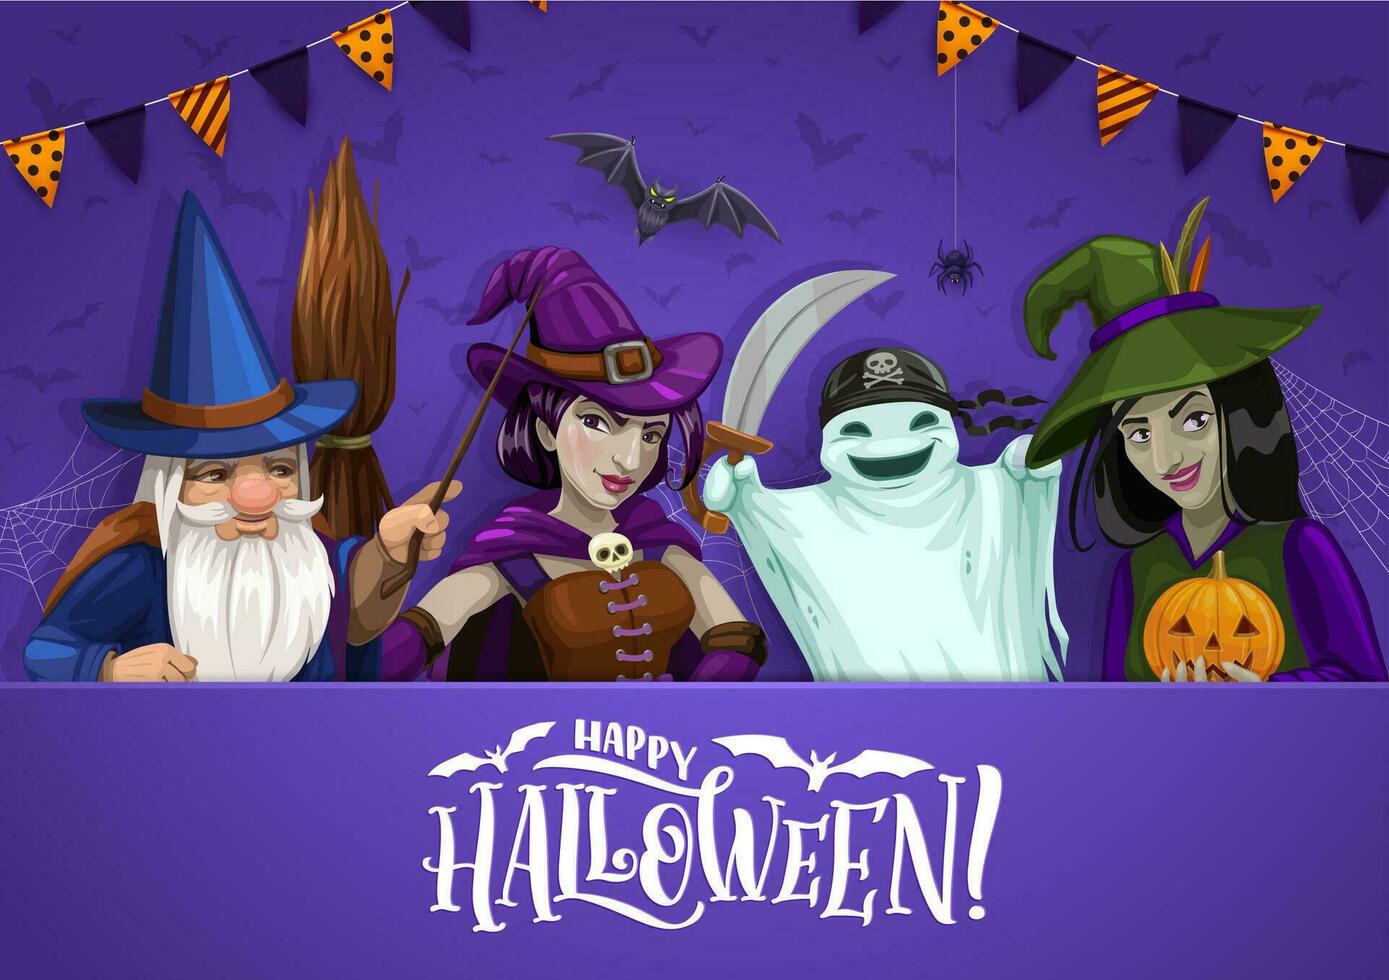 Happy Halloween banner with holiday characters vector